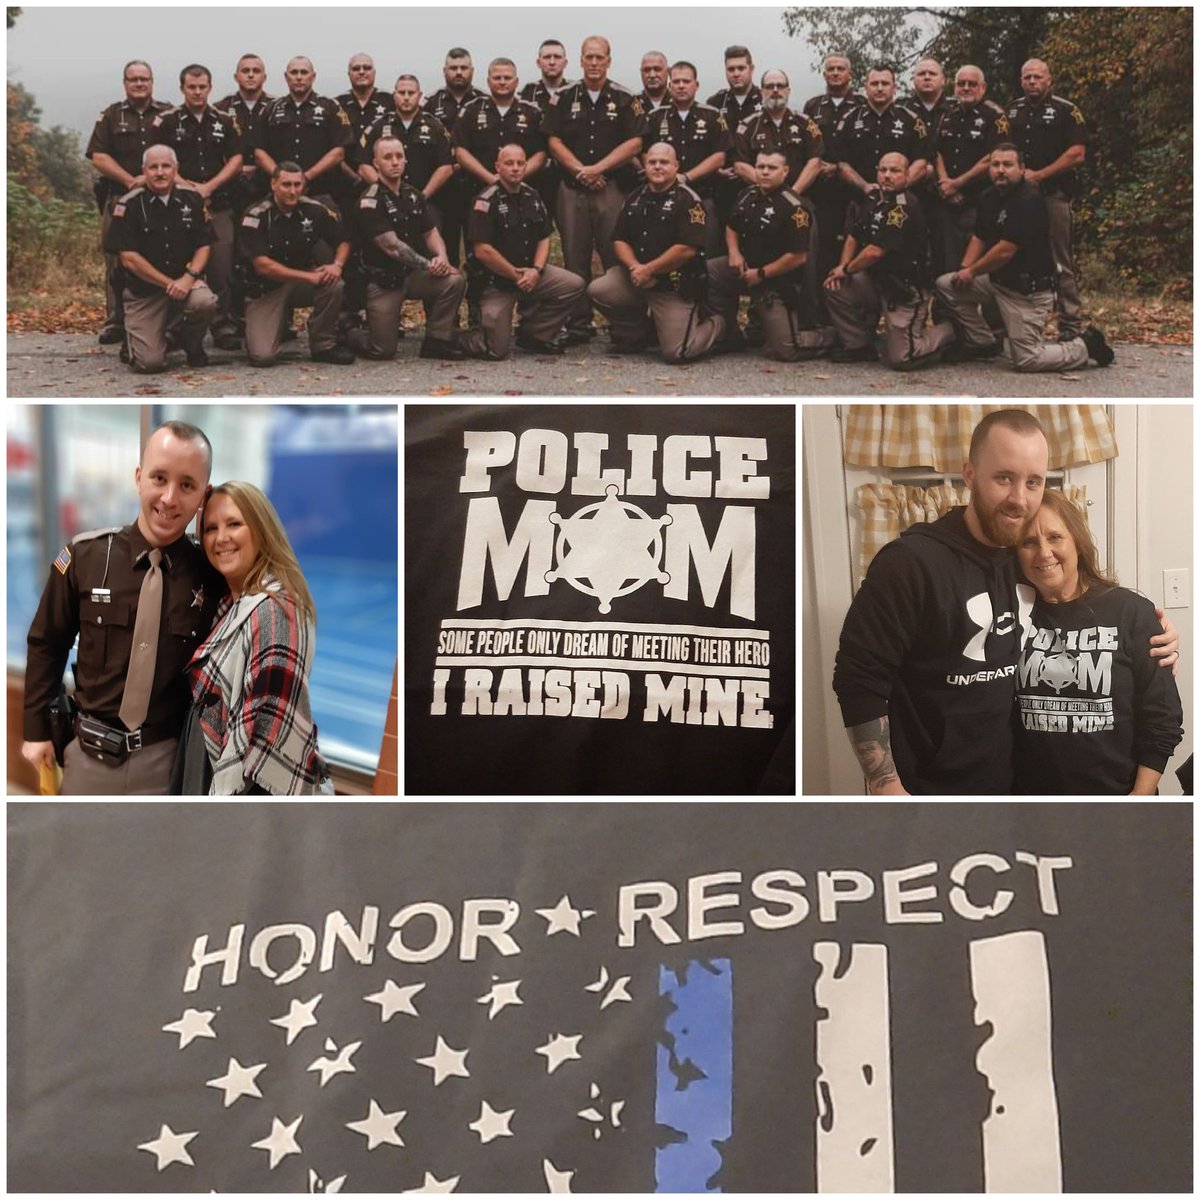 Today is National Law Enforcement Day and want to Thank this group of men for all they do on a daily basis...even thought a little biased toward one of them...So Proud of you my Son!!! #proudmom #NationalLawEnforcementAppreciationDay